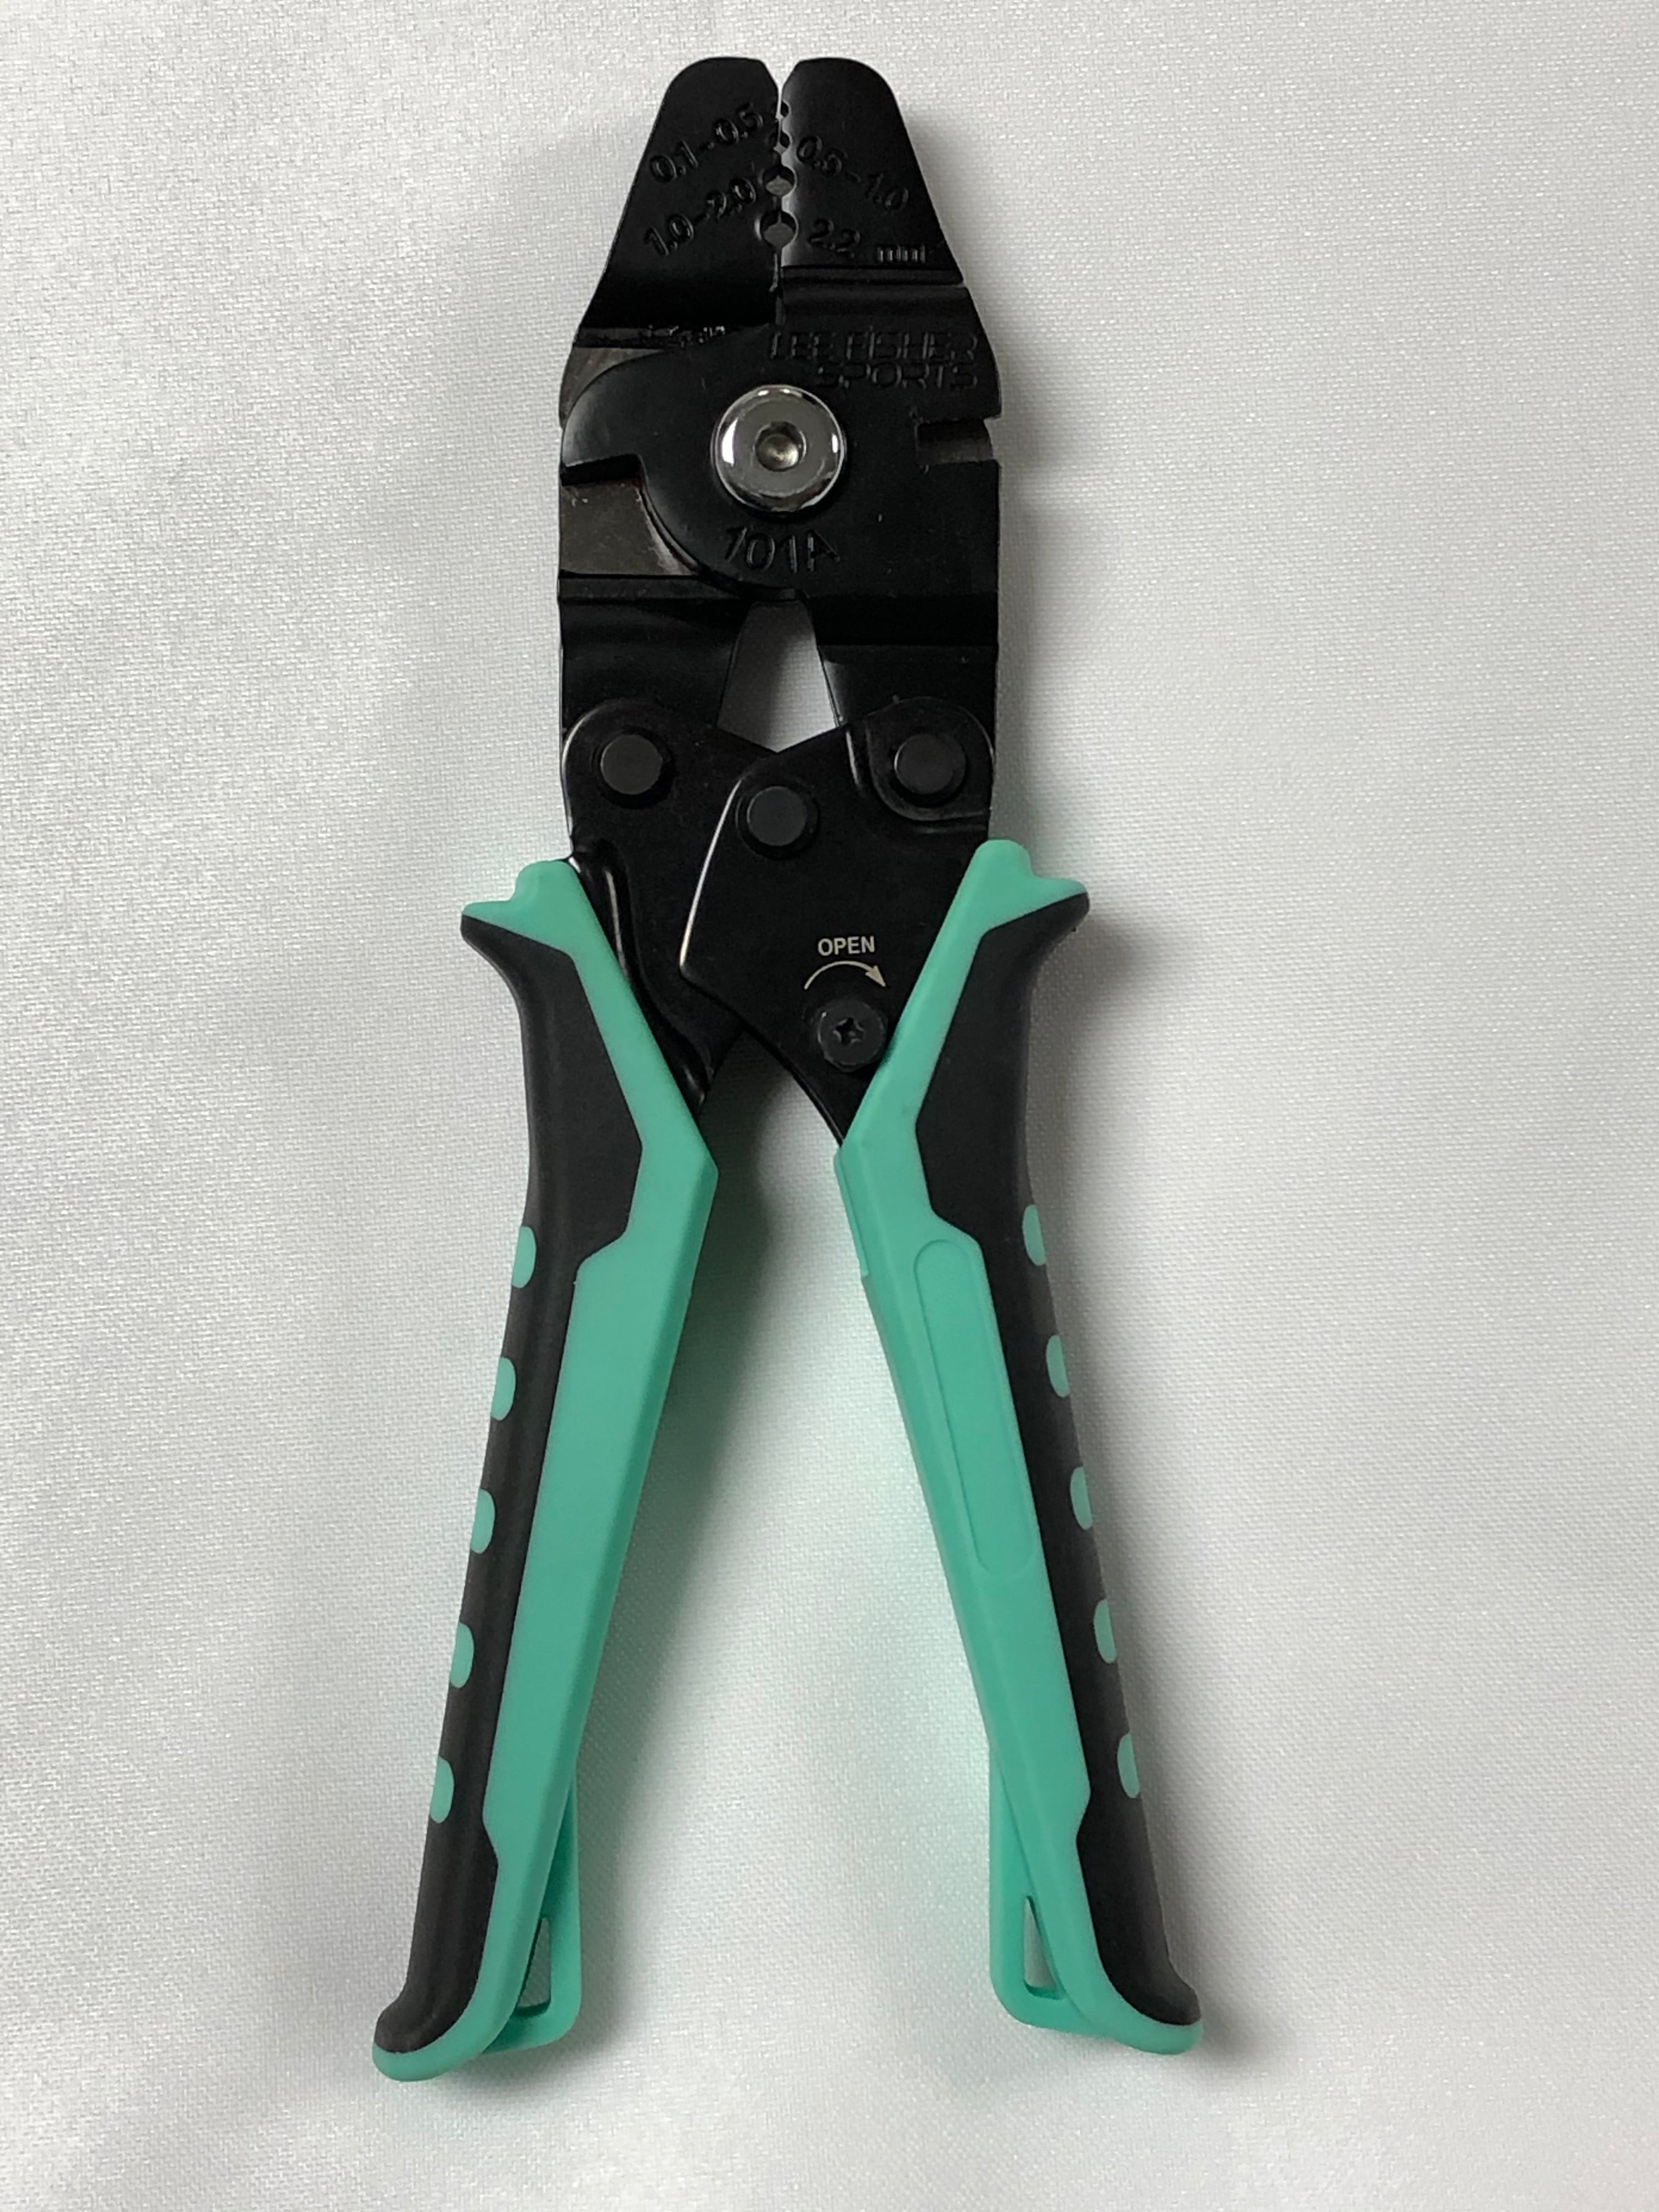 Crimper-Cutter Pliers – Lee Fisher Fishing Supply